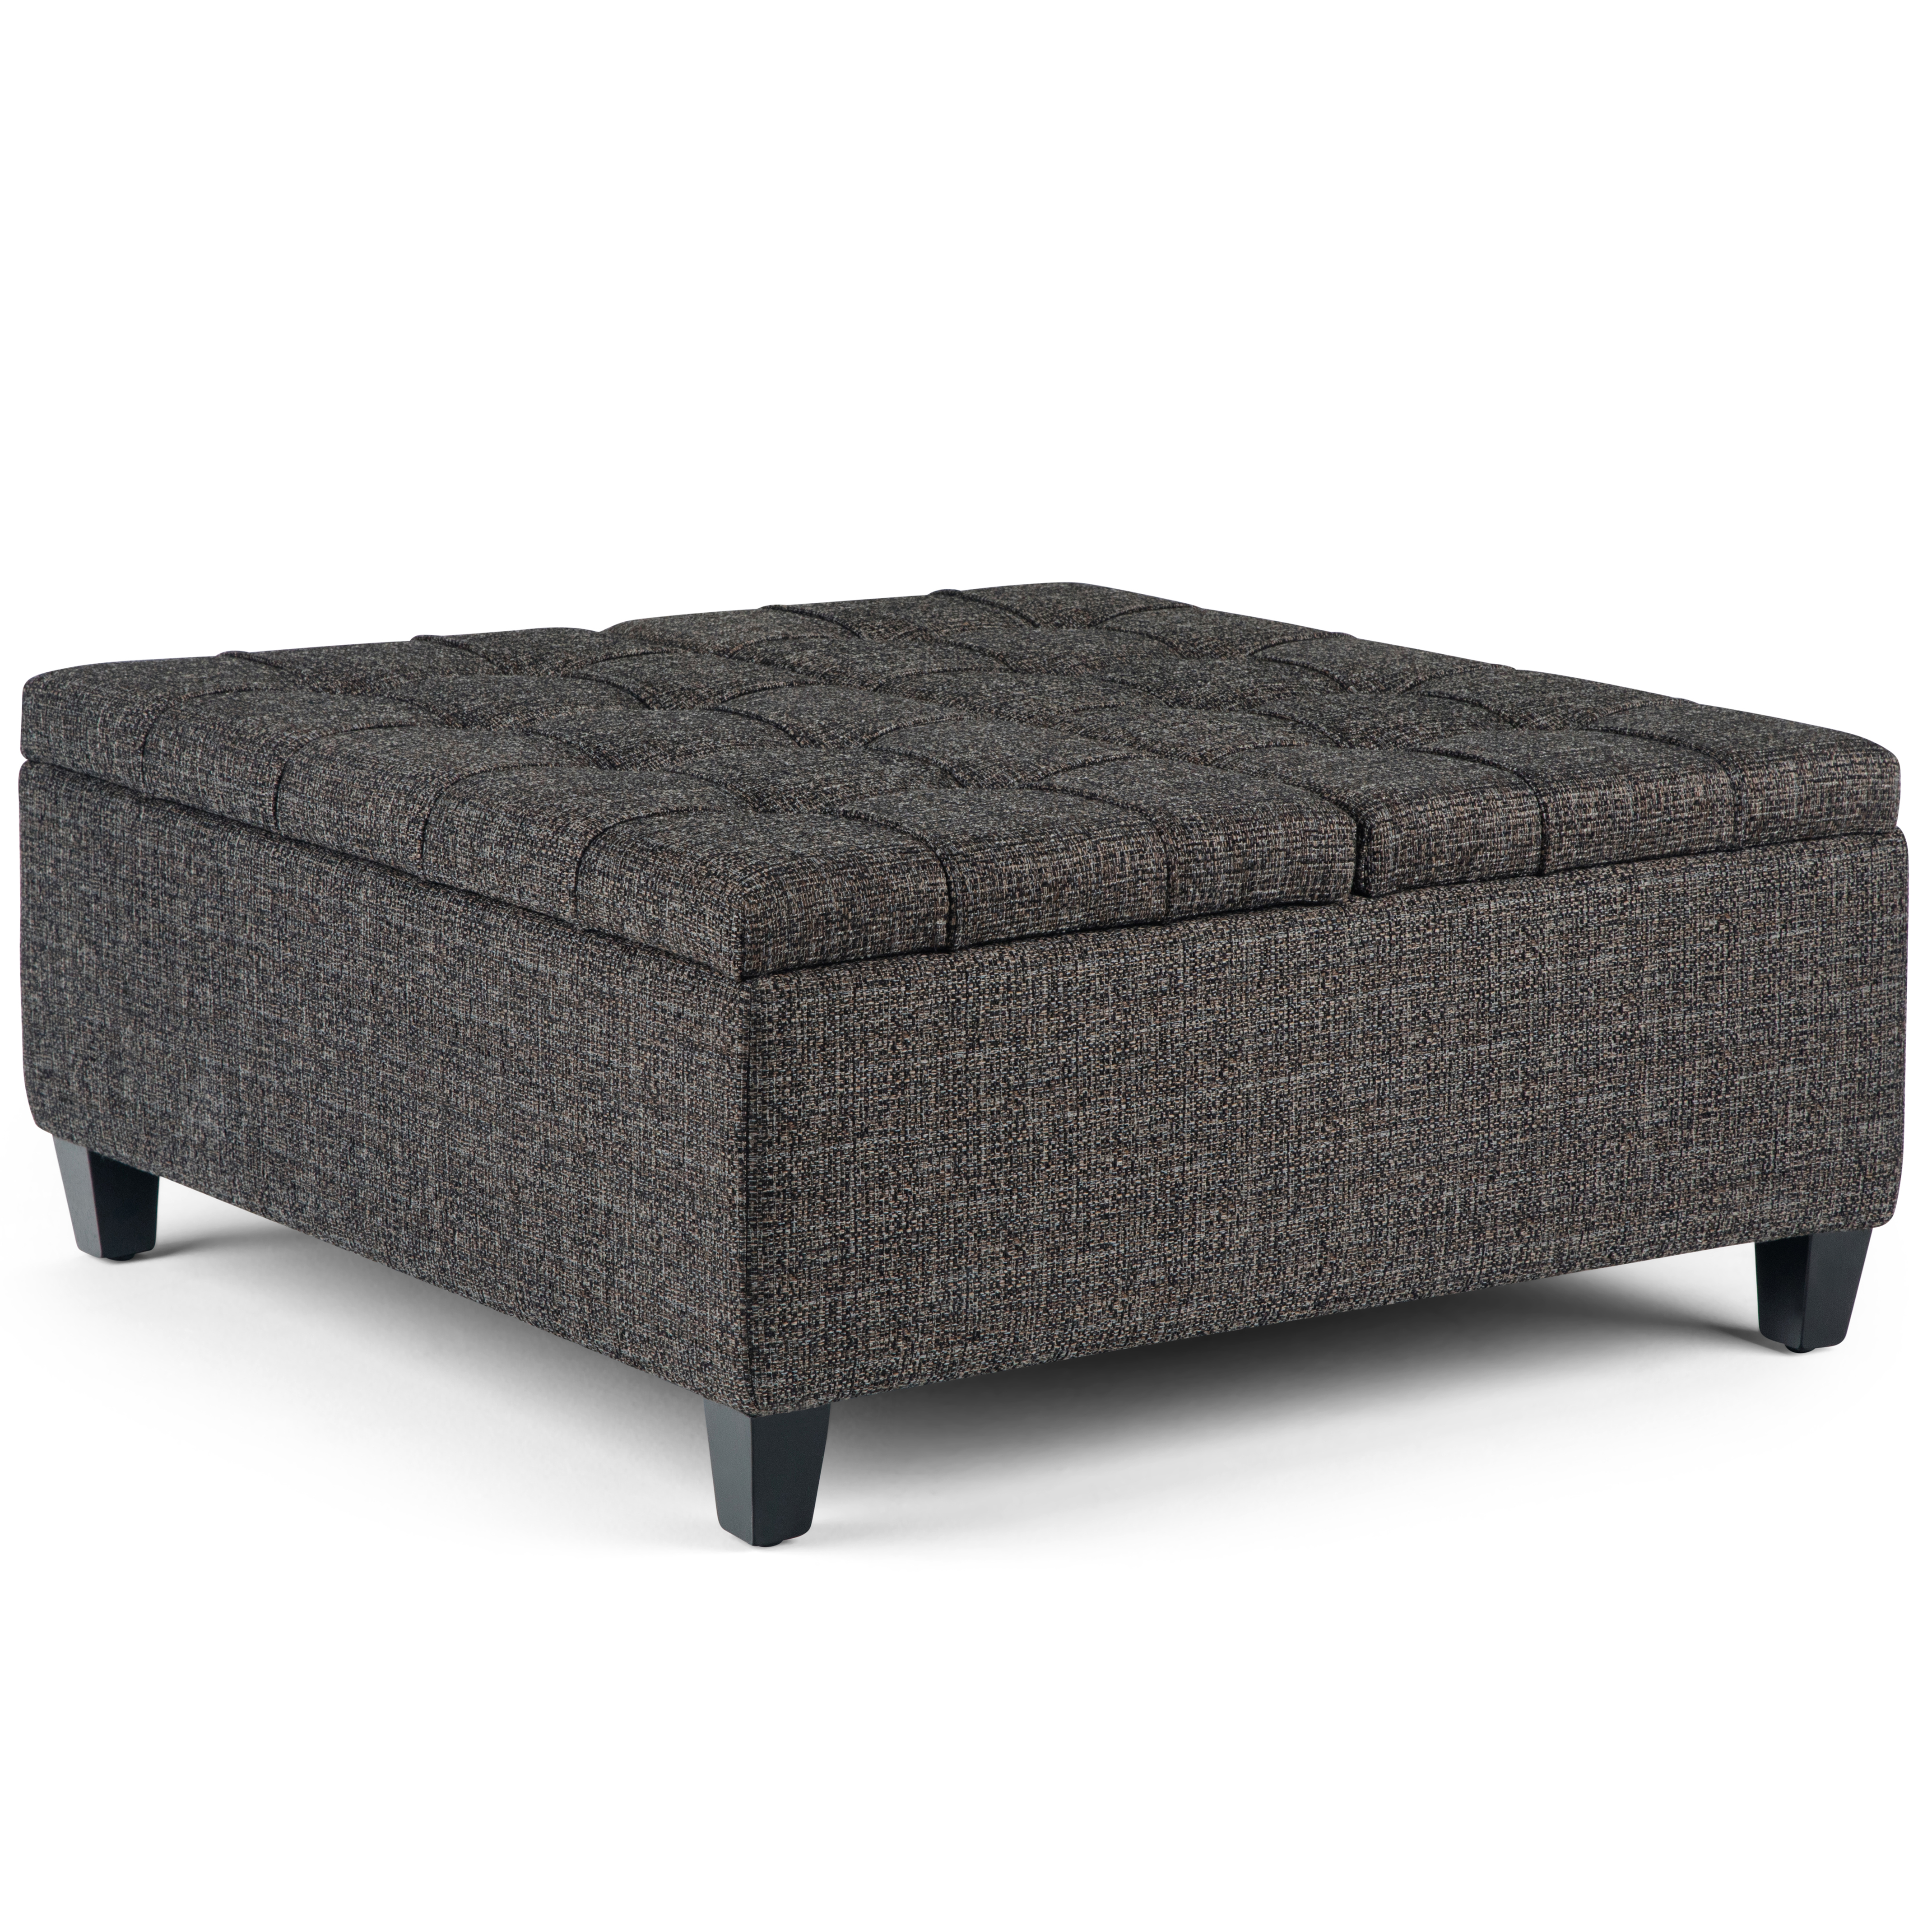 Simpli Home Harrison 36 inch Wide Transitional Square Coffee Table Storage Ottoman in Ebony Tweed Look Fabric